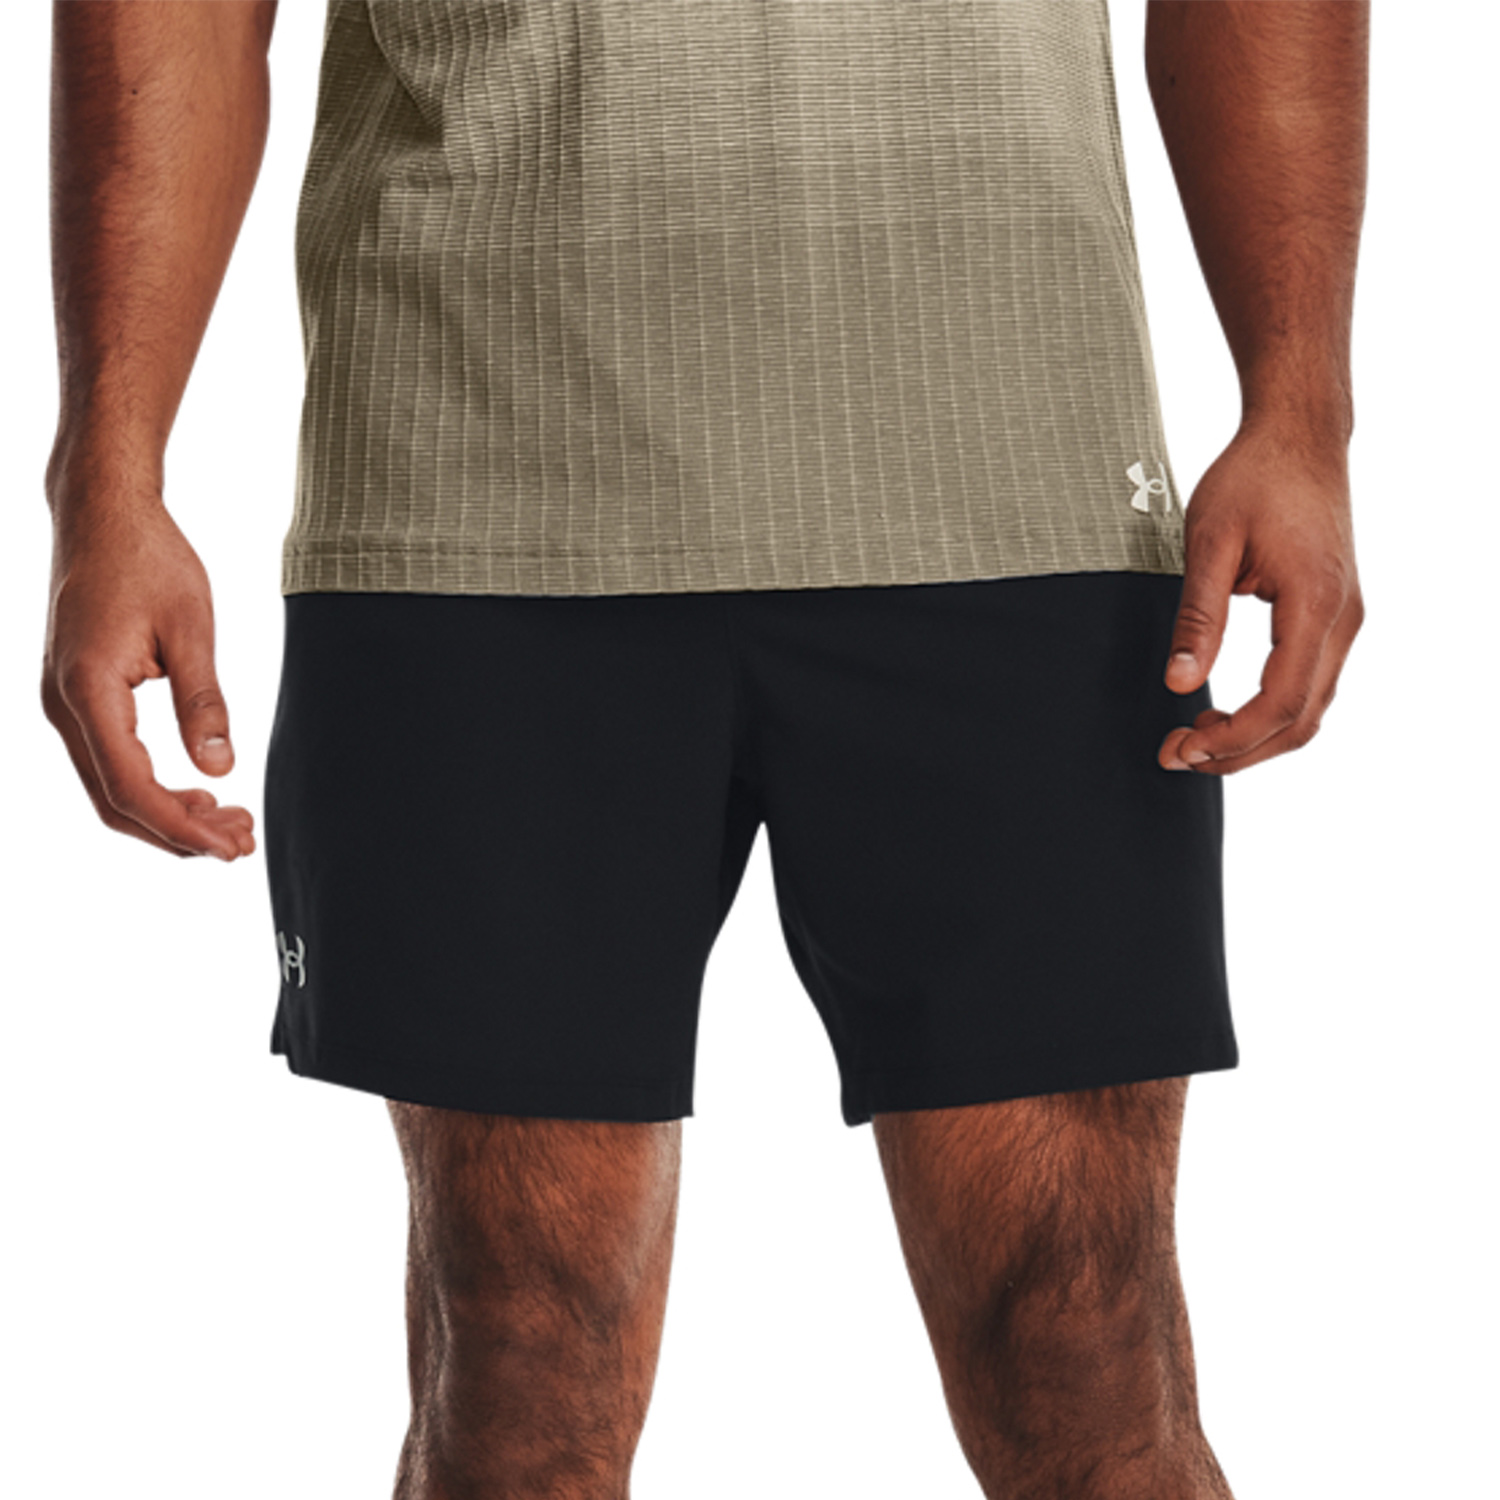 Under Armour Vanish Woven 6in Shorts - Black/Pitch Gray